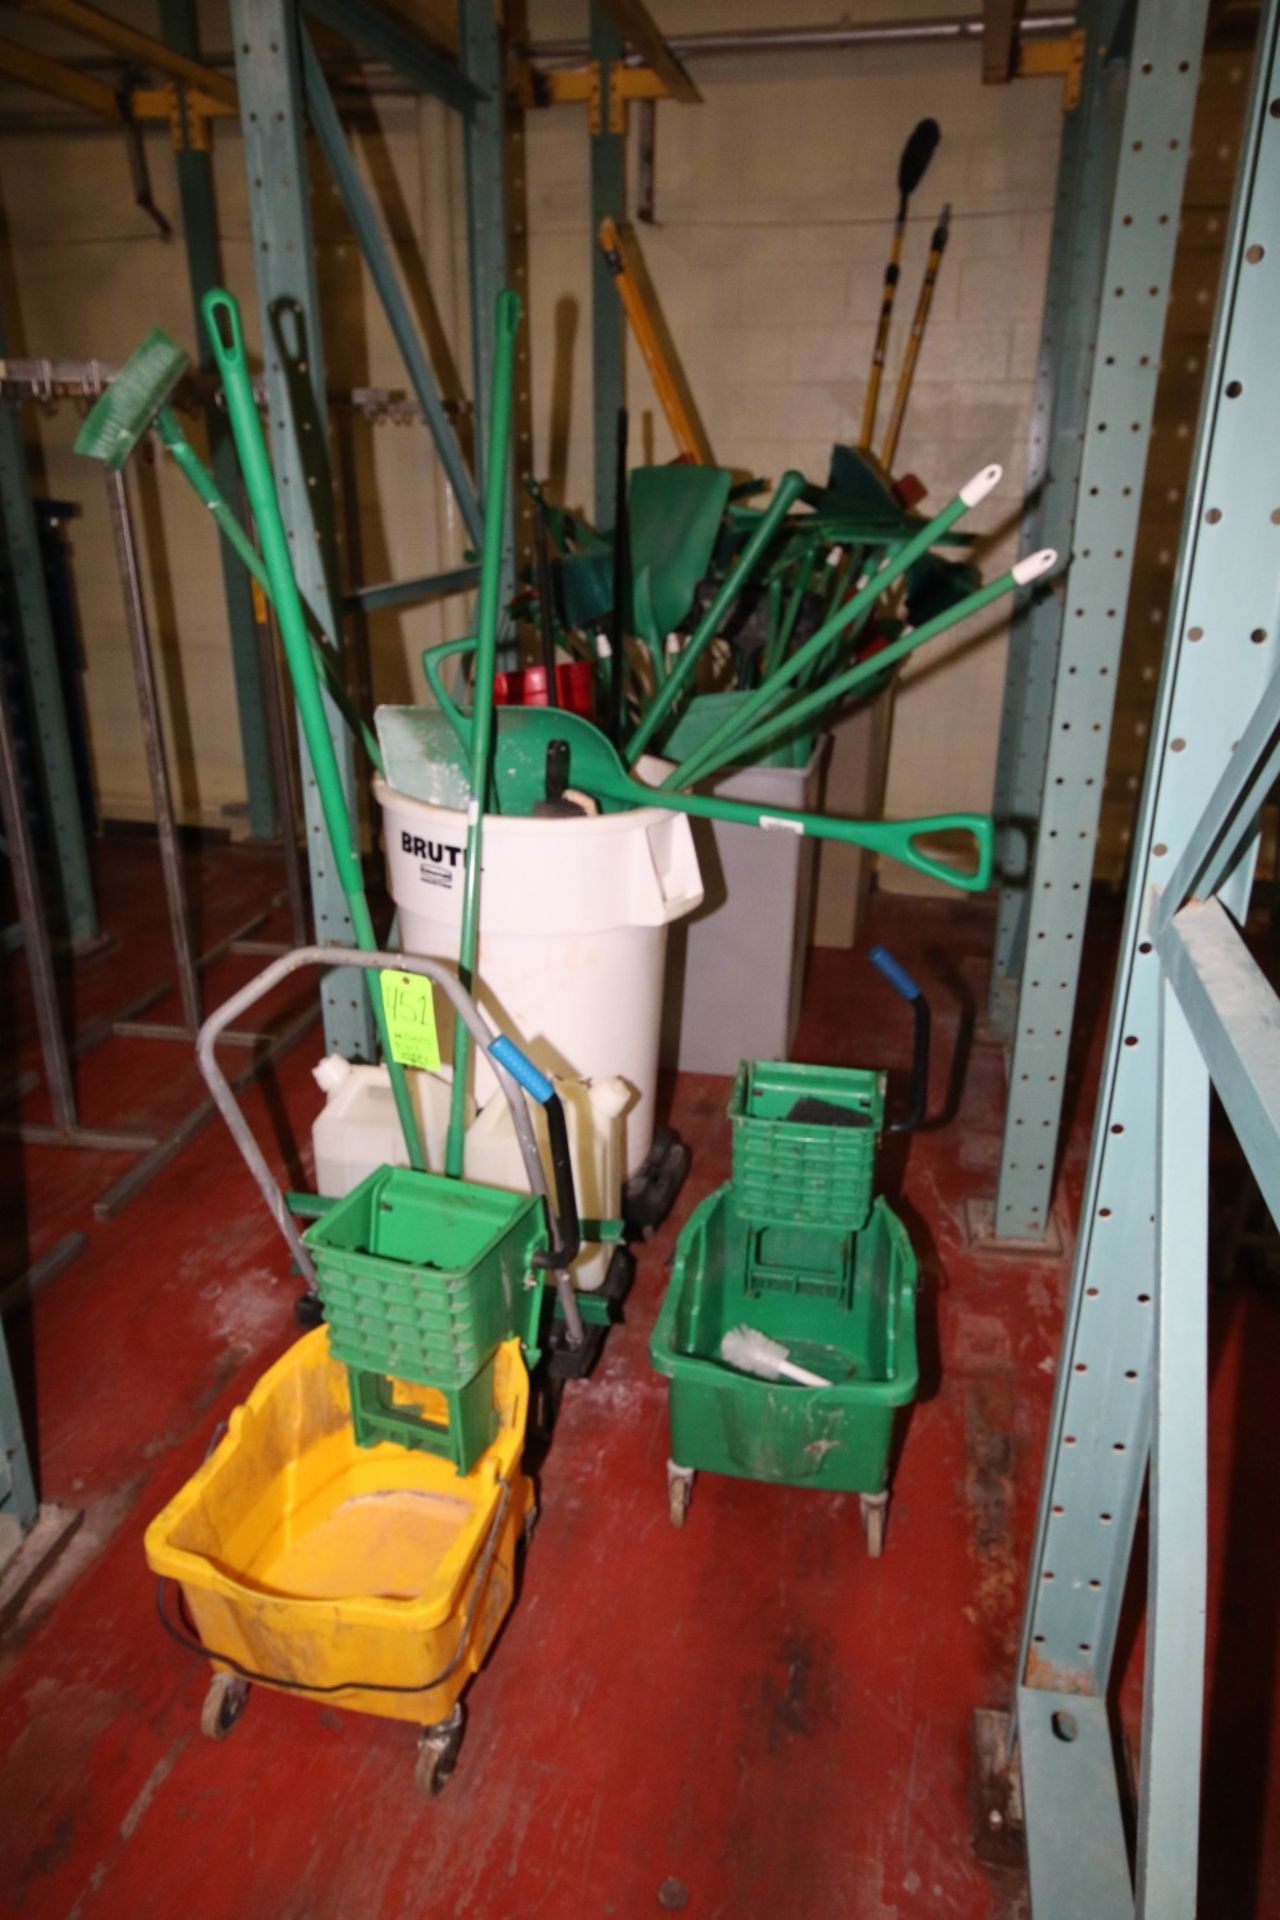 Assorted Janitorial Supplies including Wash Baskets, Brooms, Shovels and Squeegees